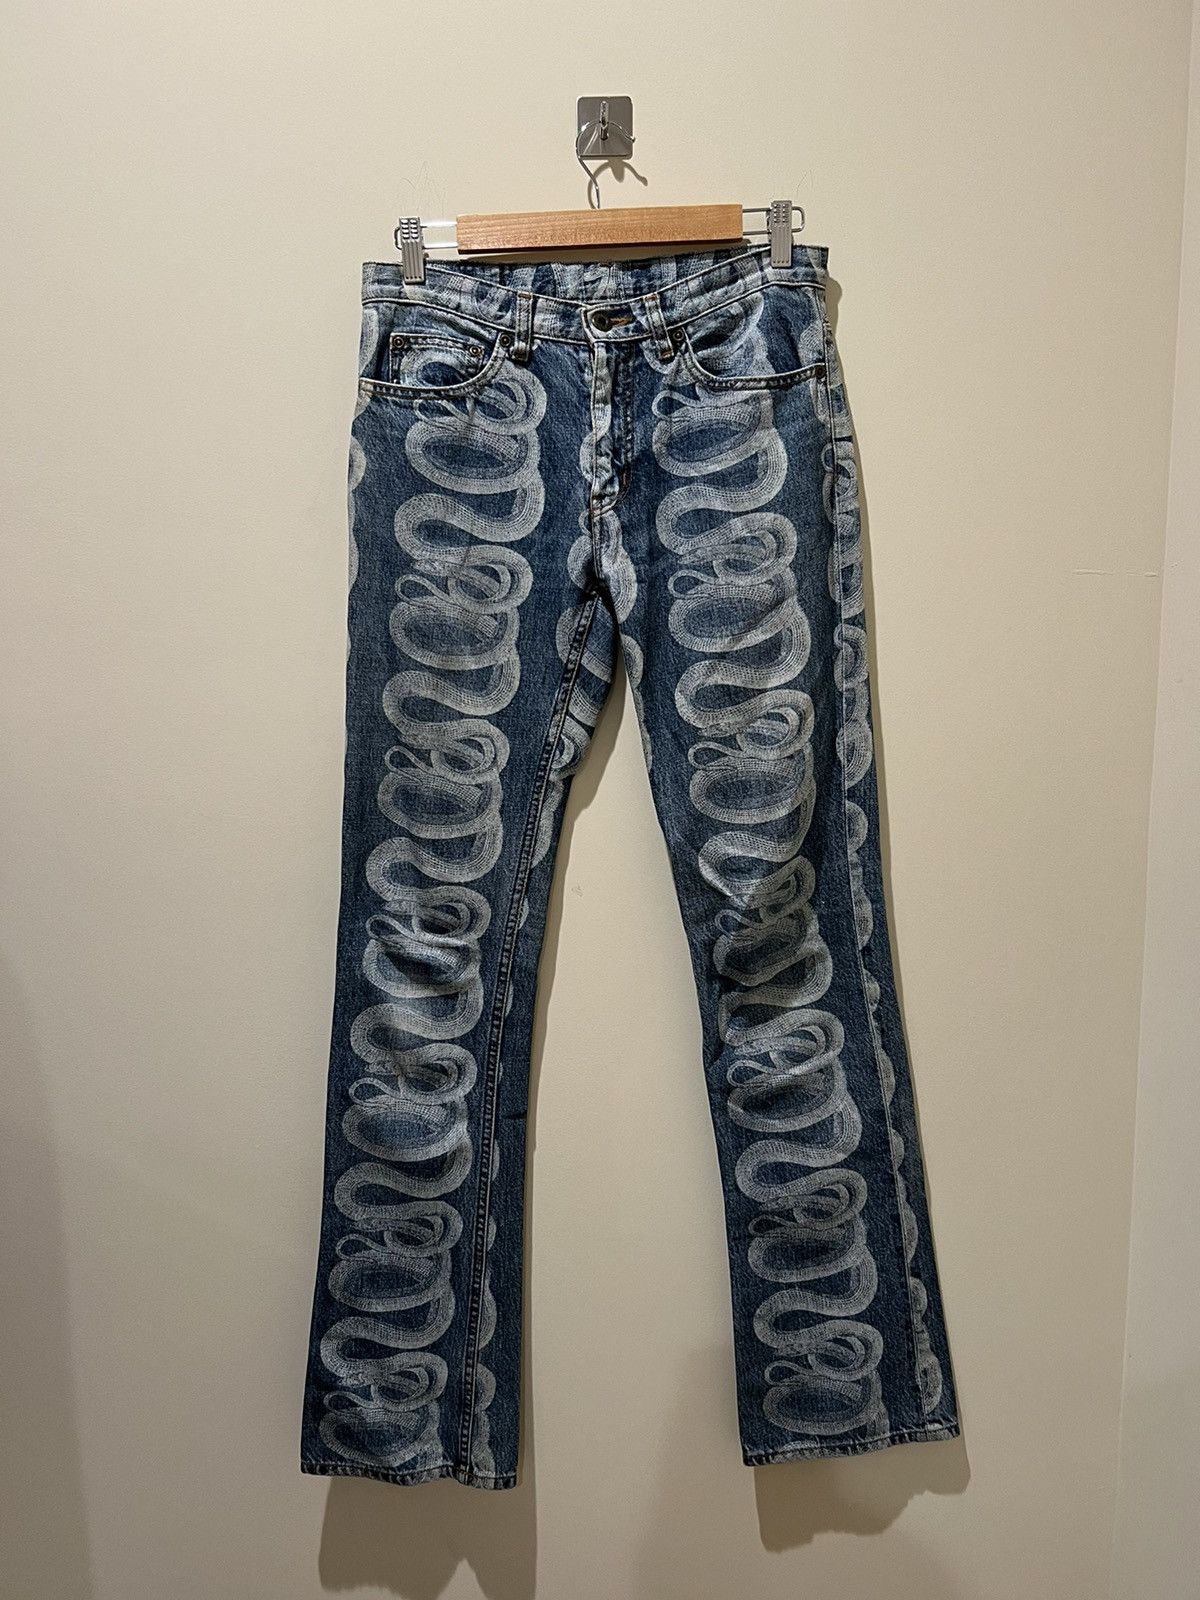 Hysteric Glamour Snake Jeans | Grailed